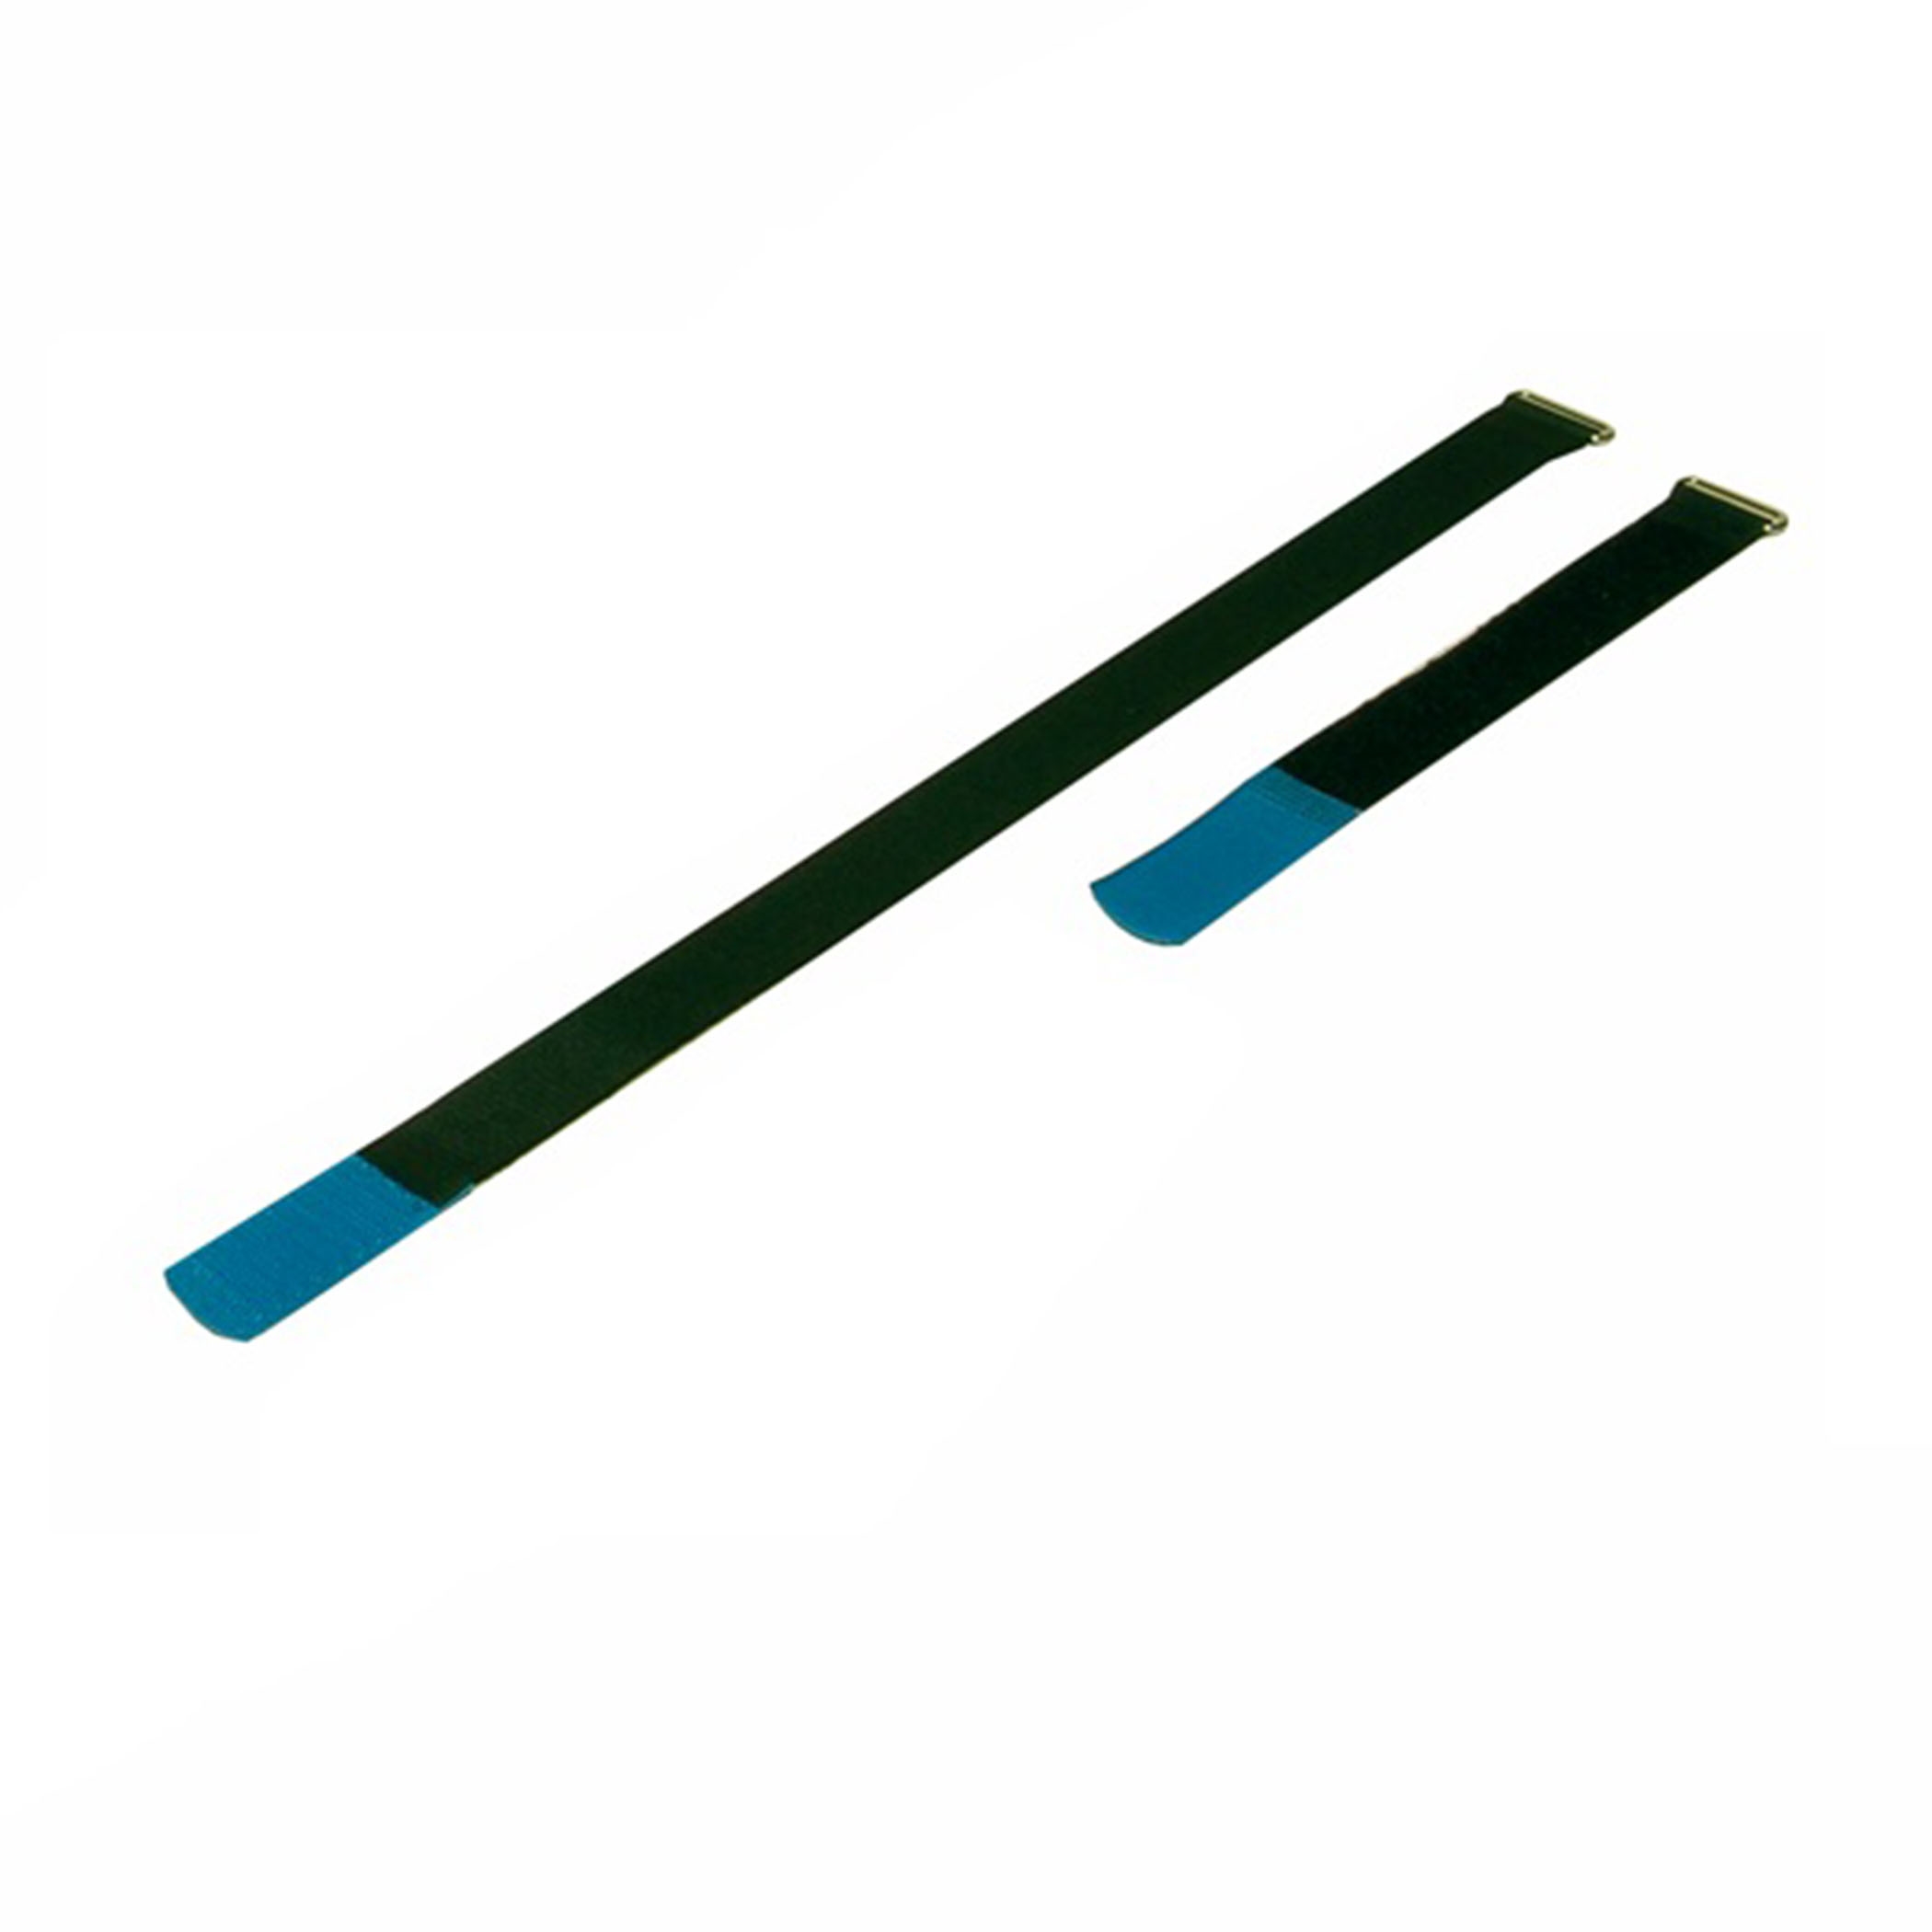 Cable Tie 220x25mm with Hook Blue, (10 pieces) - a2522h